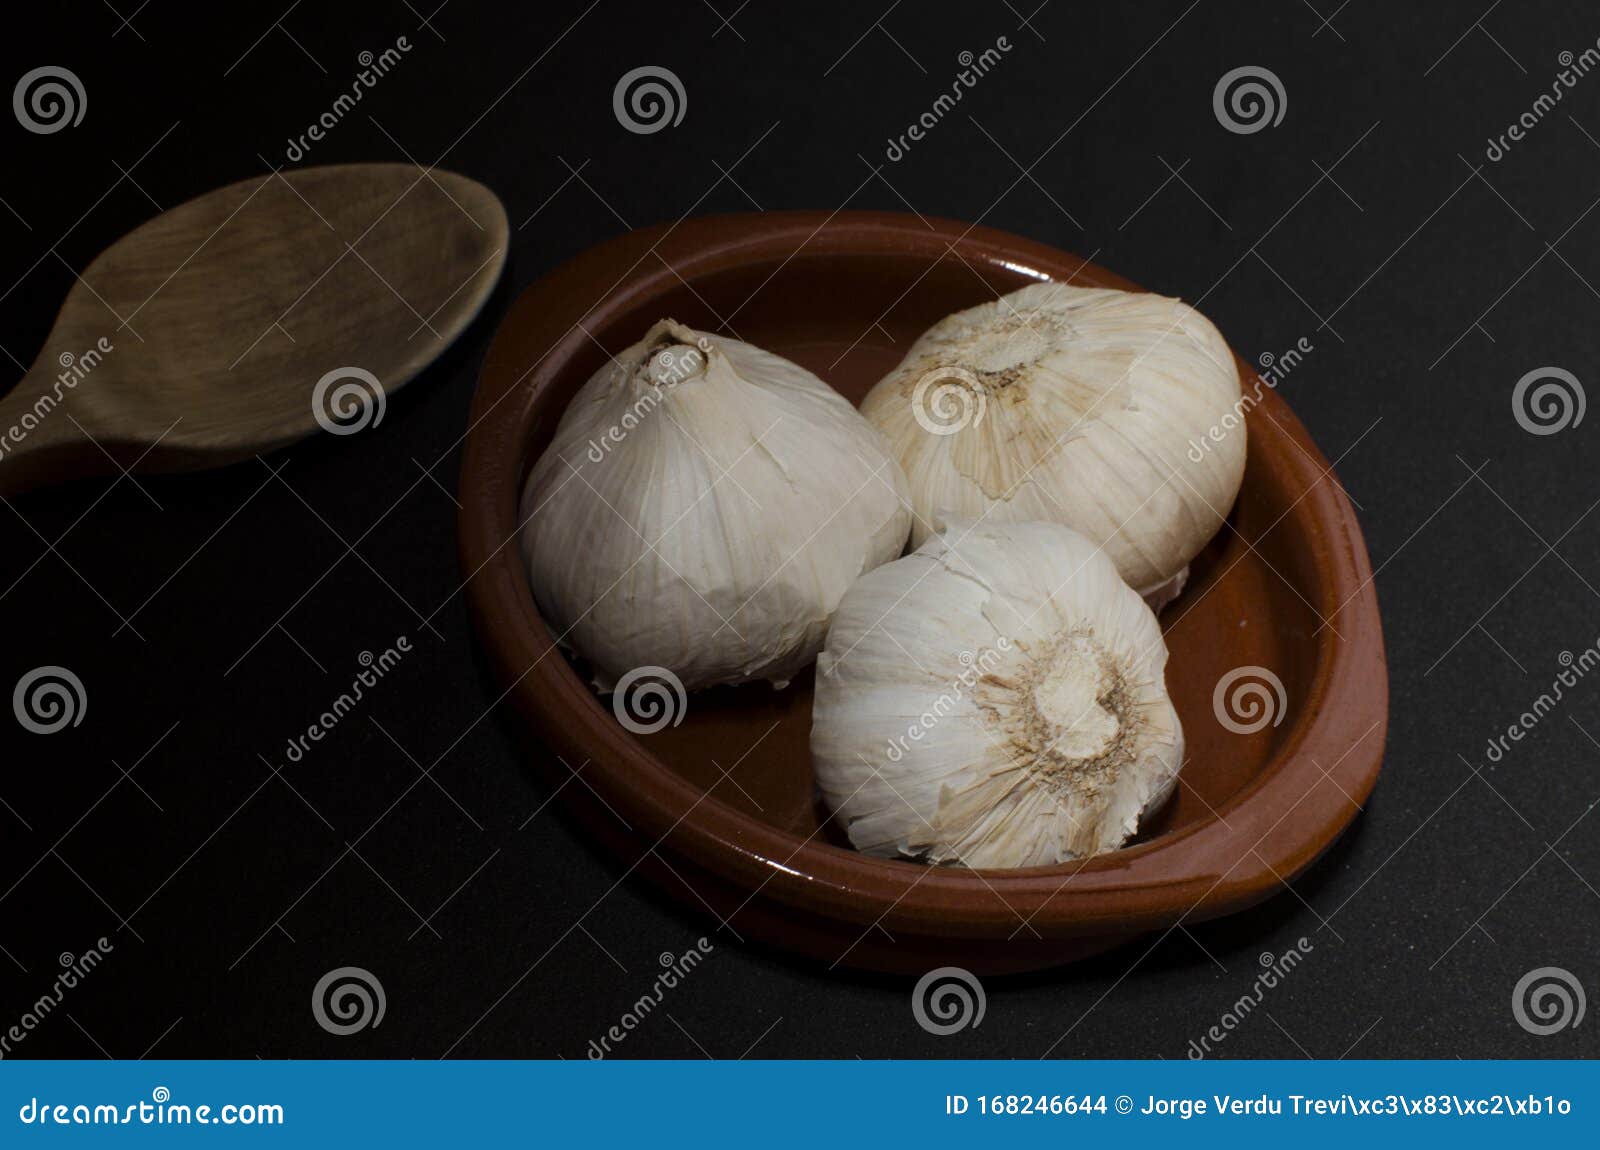 three garlic in clay pot with wooden spoon